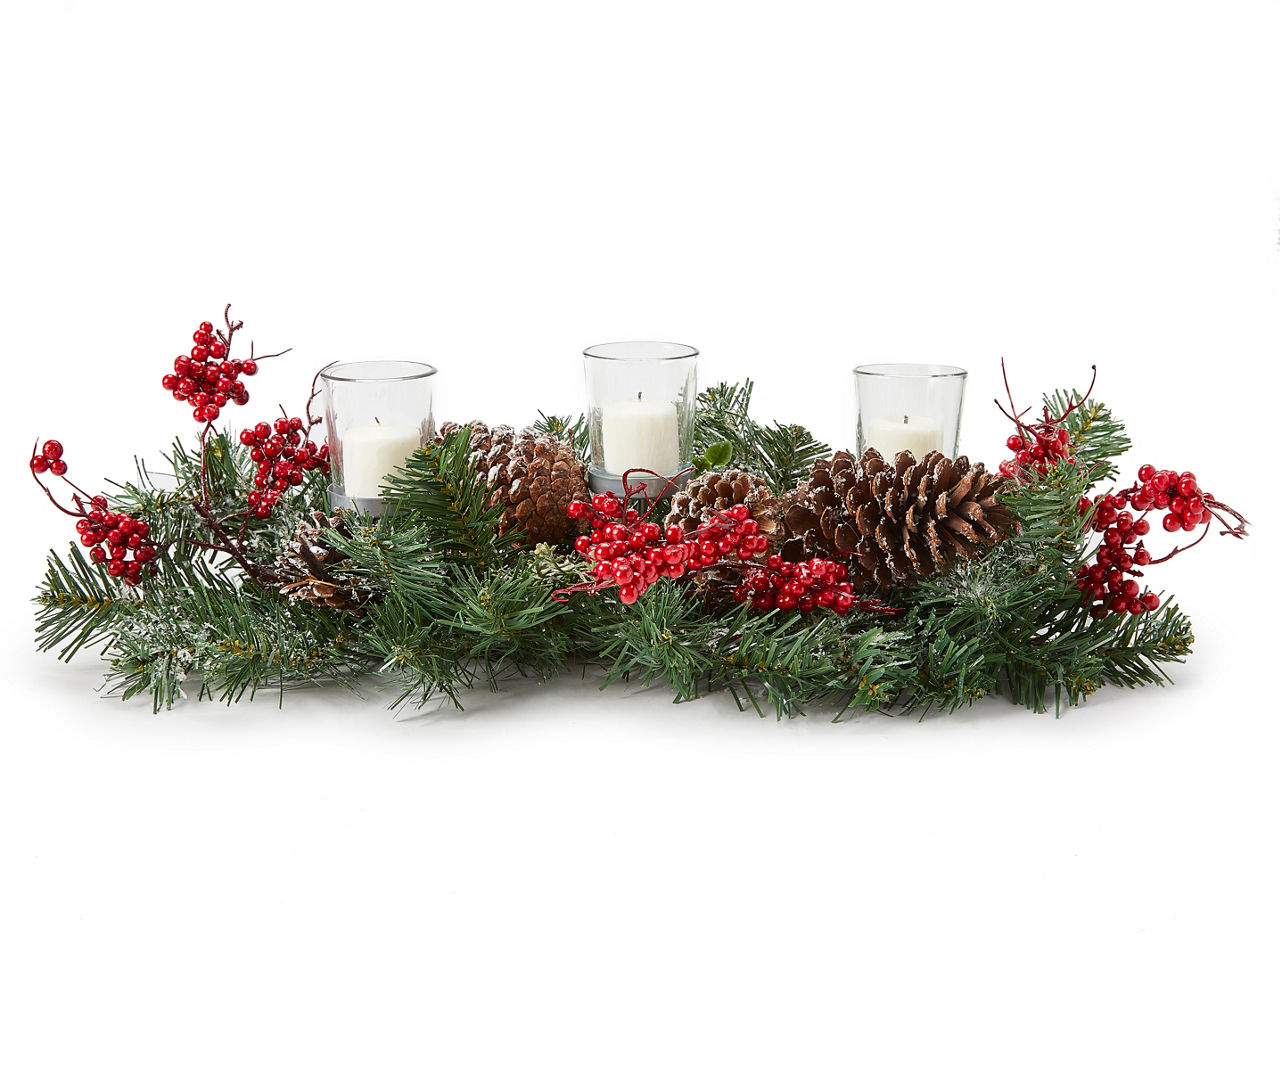 Votive Candle Holder with Greenery Base | Big Lots